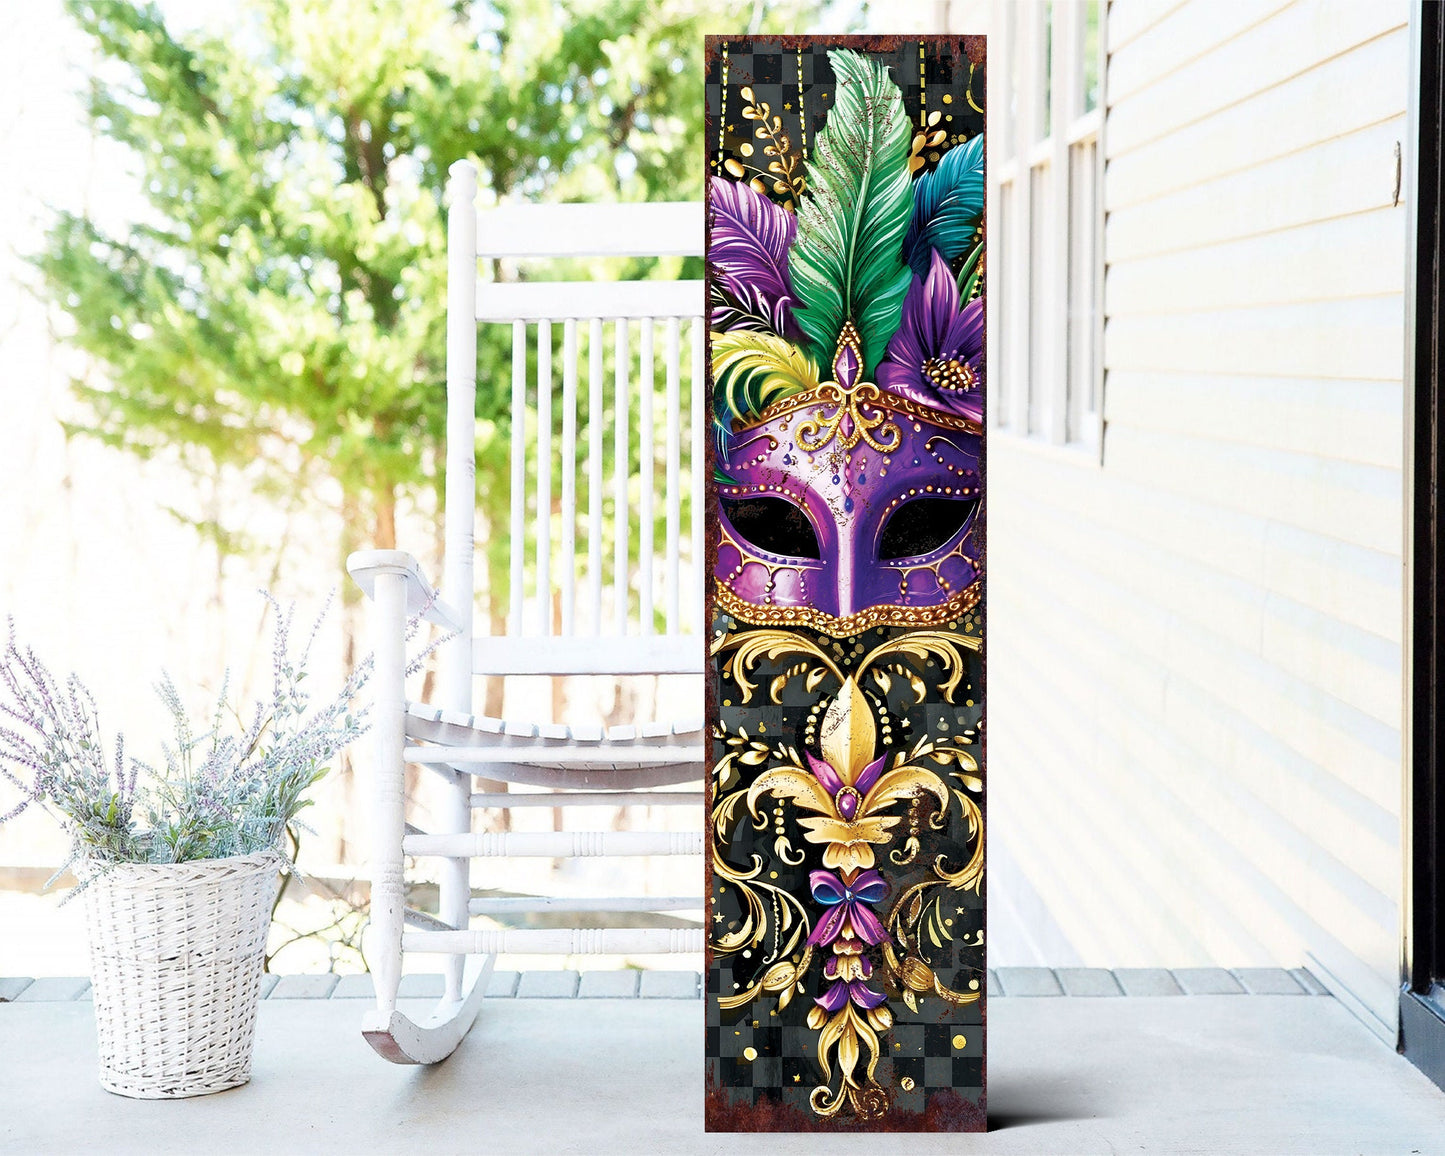 Rustic Modern Farmhouse Entryway Board - 36in Mardi Gras Mask Art Porch Sign, Front Porch Mardi Gras Welcome Sign